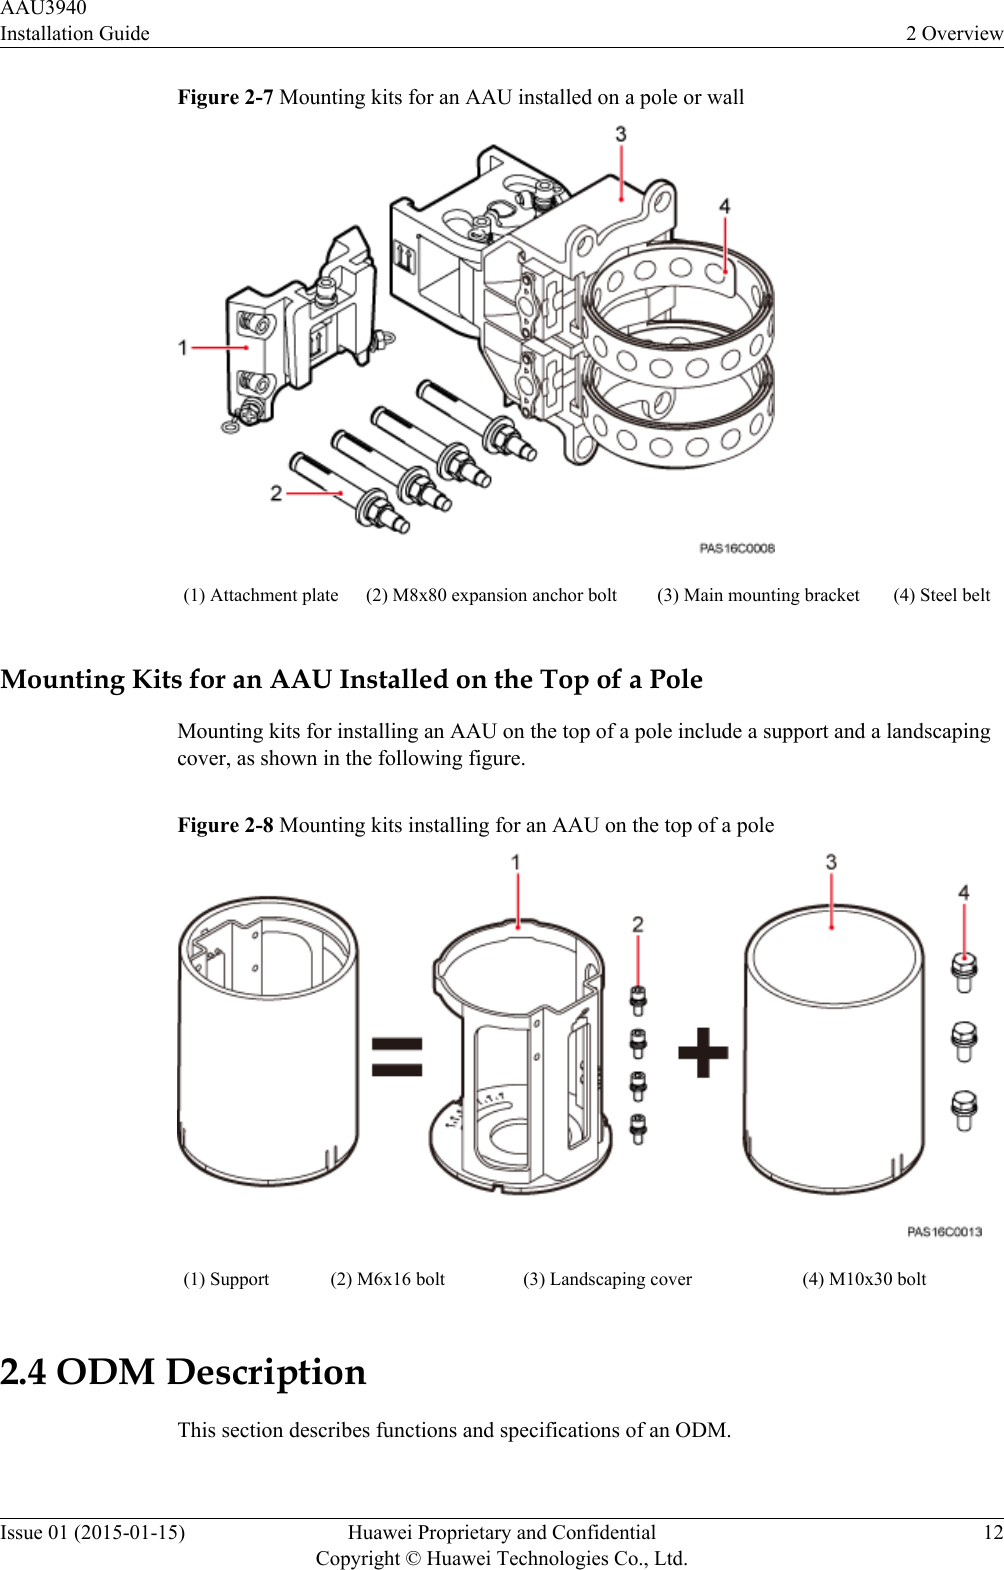 Figure 2-7 Mounting kits for an AAU installed on a pole or wall(1) Attachment plate (2) M8x80 expansion anchor bolt (3) Main mounting bracket (4) Steel beltMounting Kits for an AAU Installed on the Top of a PoleMounting kits for installing an AAU on the top of a pole include a support and a landscapingcover, as shown in the following figure.Figure 2-8 Mounting kits installing for an AAU on the top of a pole(1) Support (2) M6x16 bolt (3) Landscaping cover (4) M10x30 bolt2.4 ODM DescriptionThis section describes functions and specifications of an ODM.AAU3940Installation Guide 2 OverviewIssue 01 (2015-01-15) Huawei Proprietary and ConfidentialCopyright © Huawei Technologies Co., Ltd.12